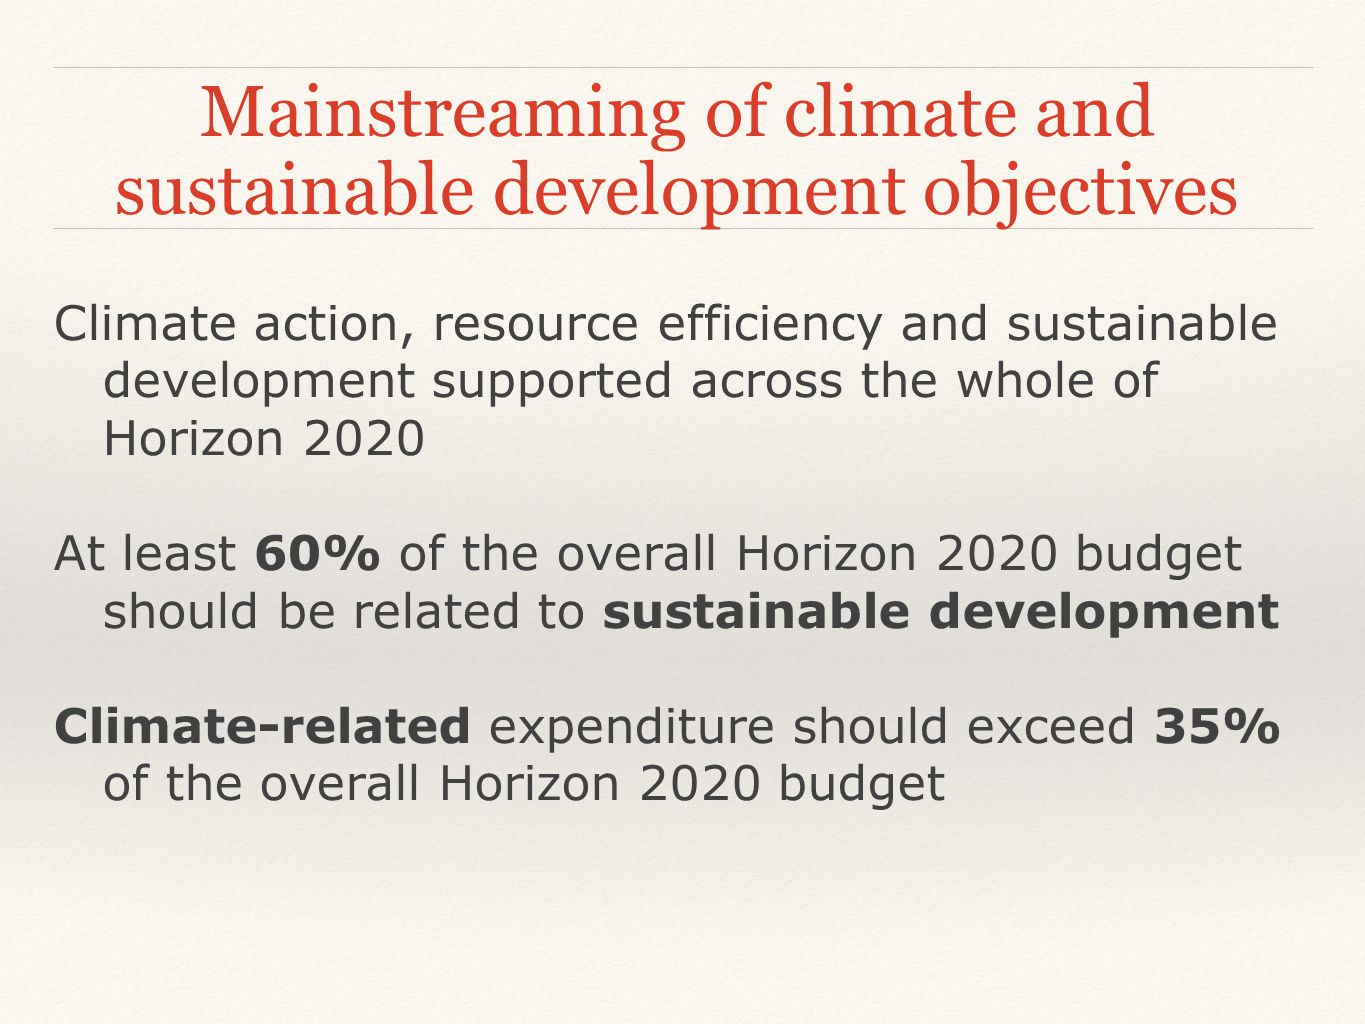 Mainstreaming of climate and sustainable development objectives Climate action, resource efficiency and sustainable development supported across the whole of Horizon 2020 At least 60% of the overall Horizon 2020 budget should be related to sustainable development Climate-related expenditure should exceed 35% of the overall Horizon 2020 budget